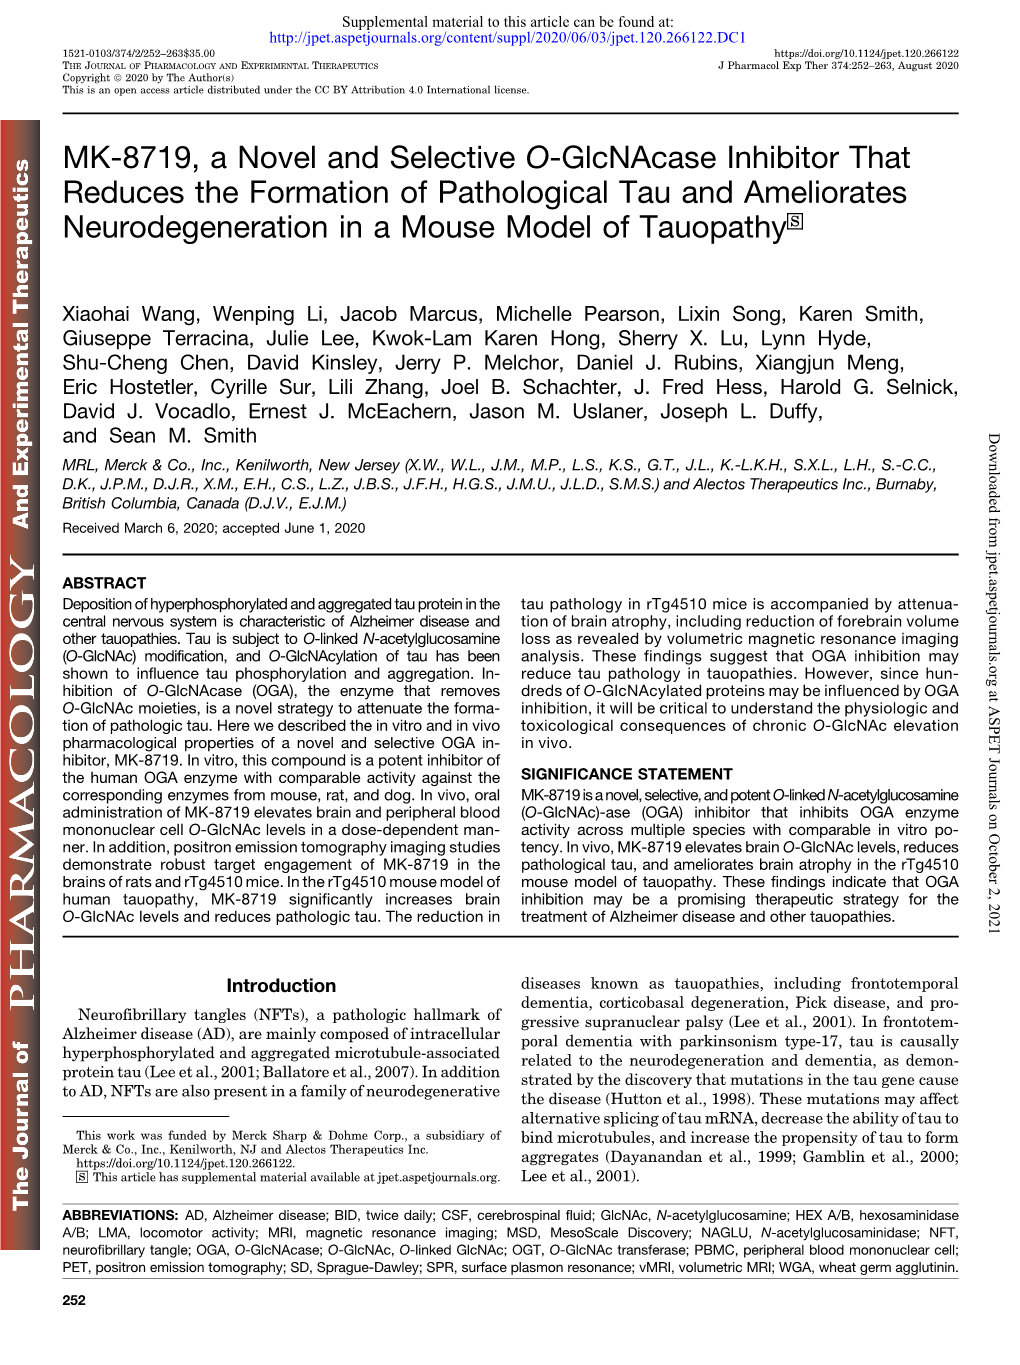 MK-8719, a Novel and Selective O-Glcnacase Inhibitor That Reduces the Formation of Pathological Tau and Ameliorates Neurodegeneration in a Mouse Model of Tauopathy S